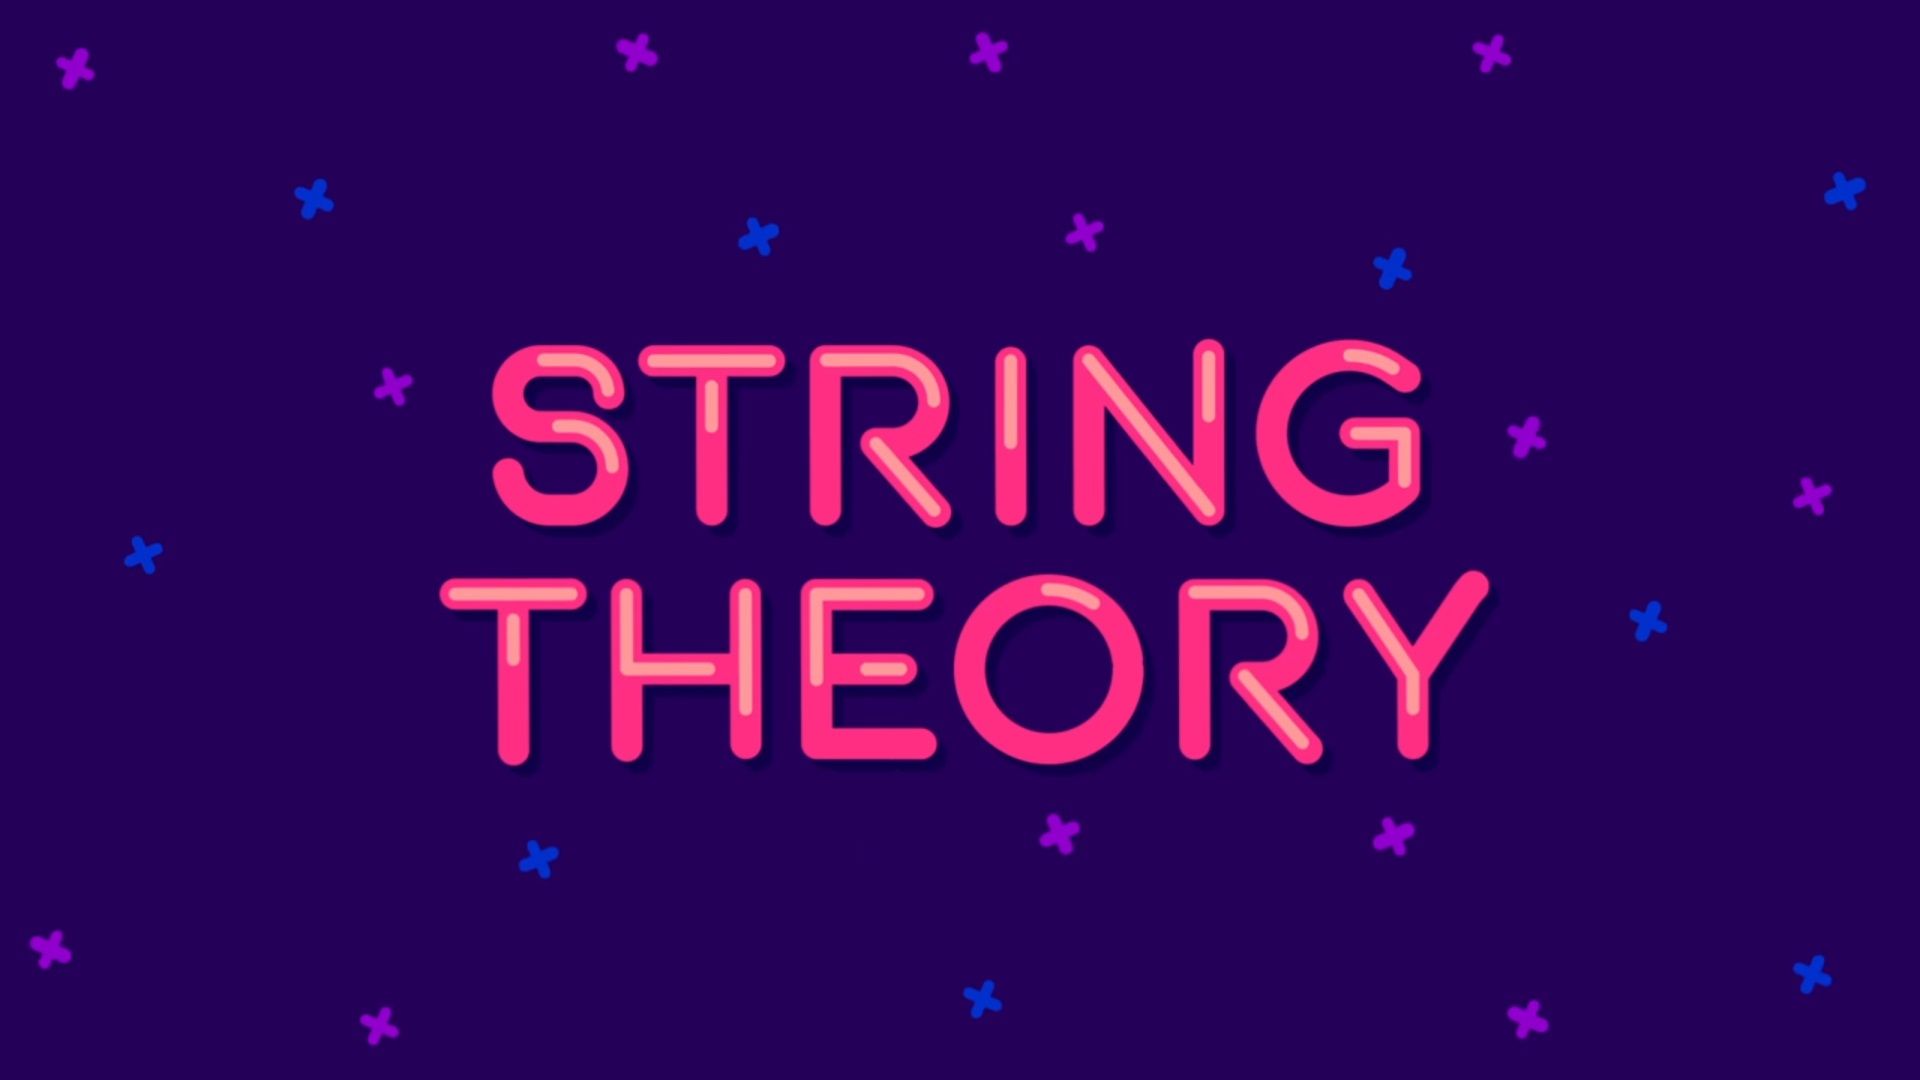 Get Your Mind Blown With This Easy To Understand But Hard To Comprehend Video On String Theory